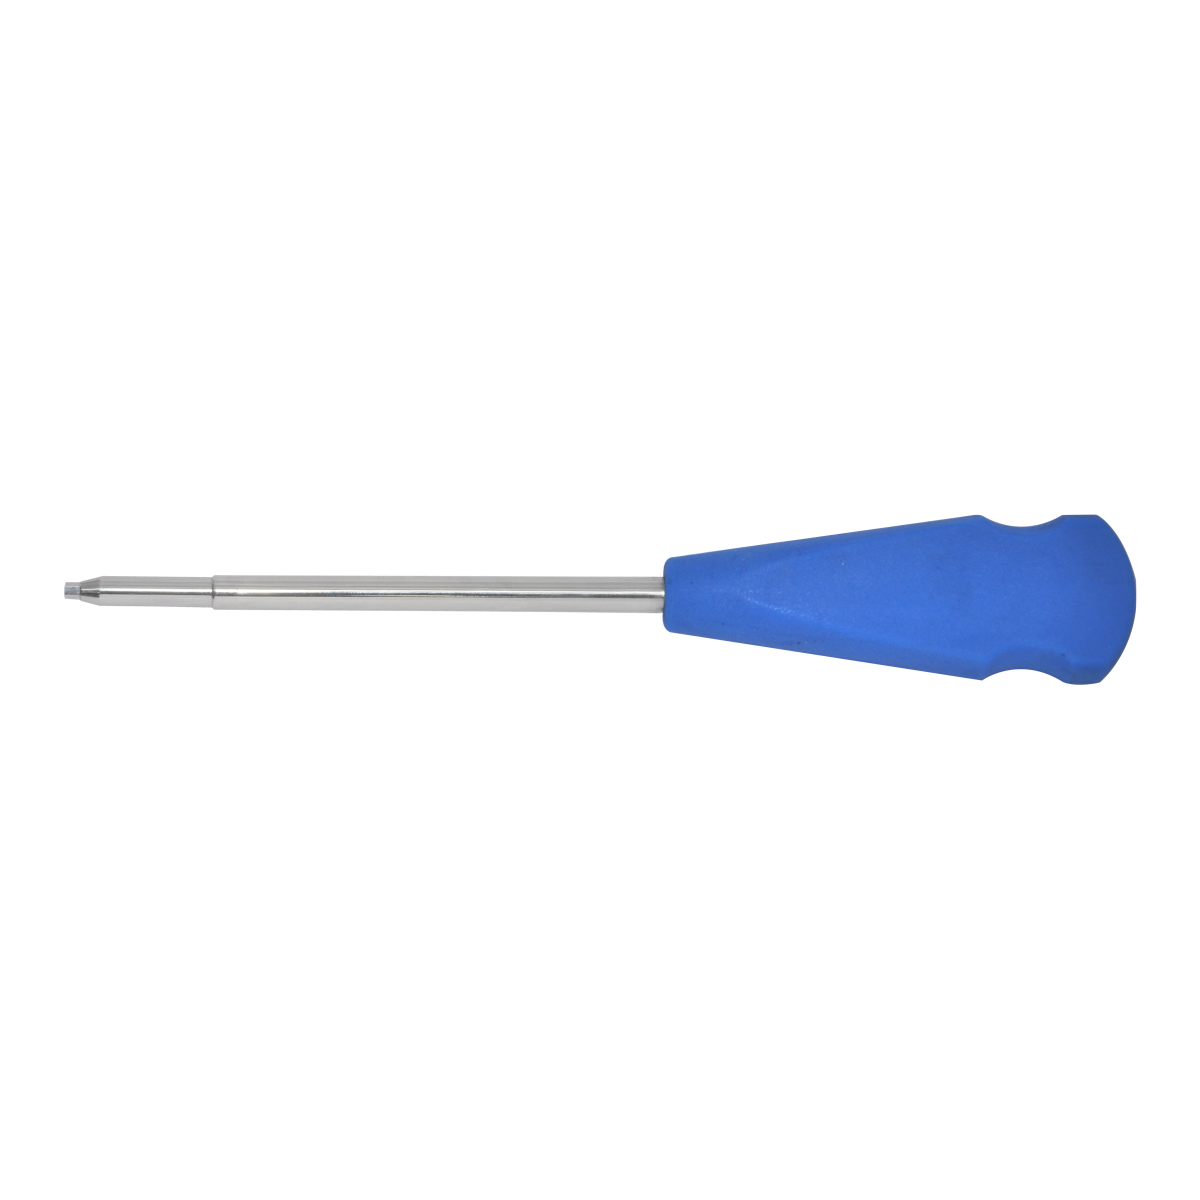 Hexagonal Screw Driver 2.0mm Tip-Silicon Handle